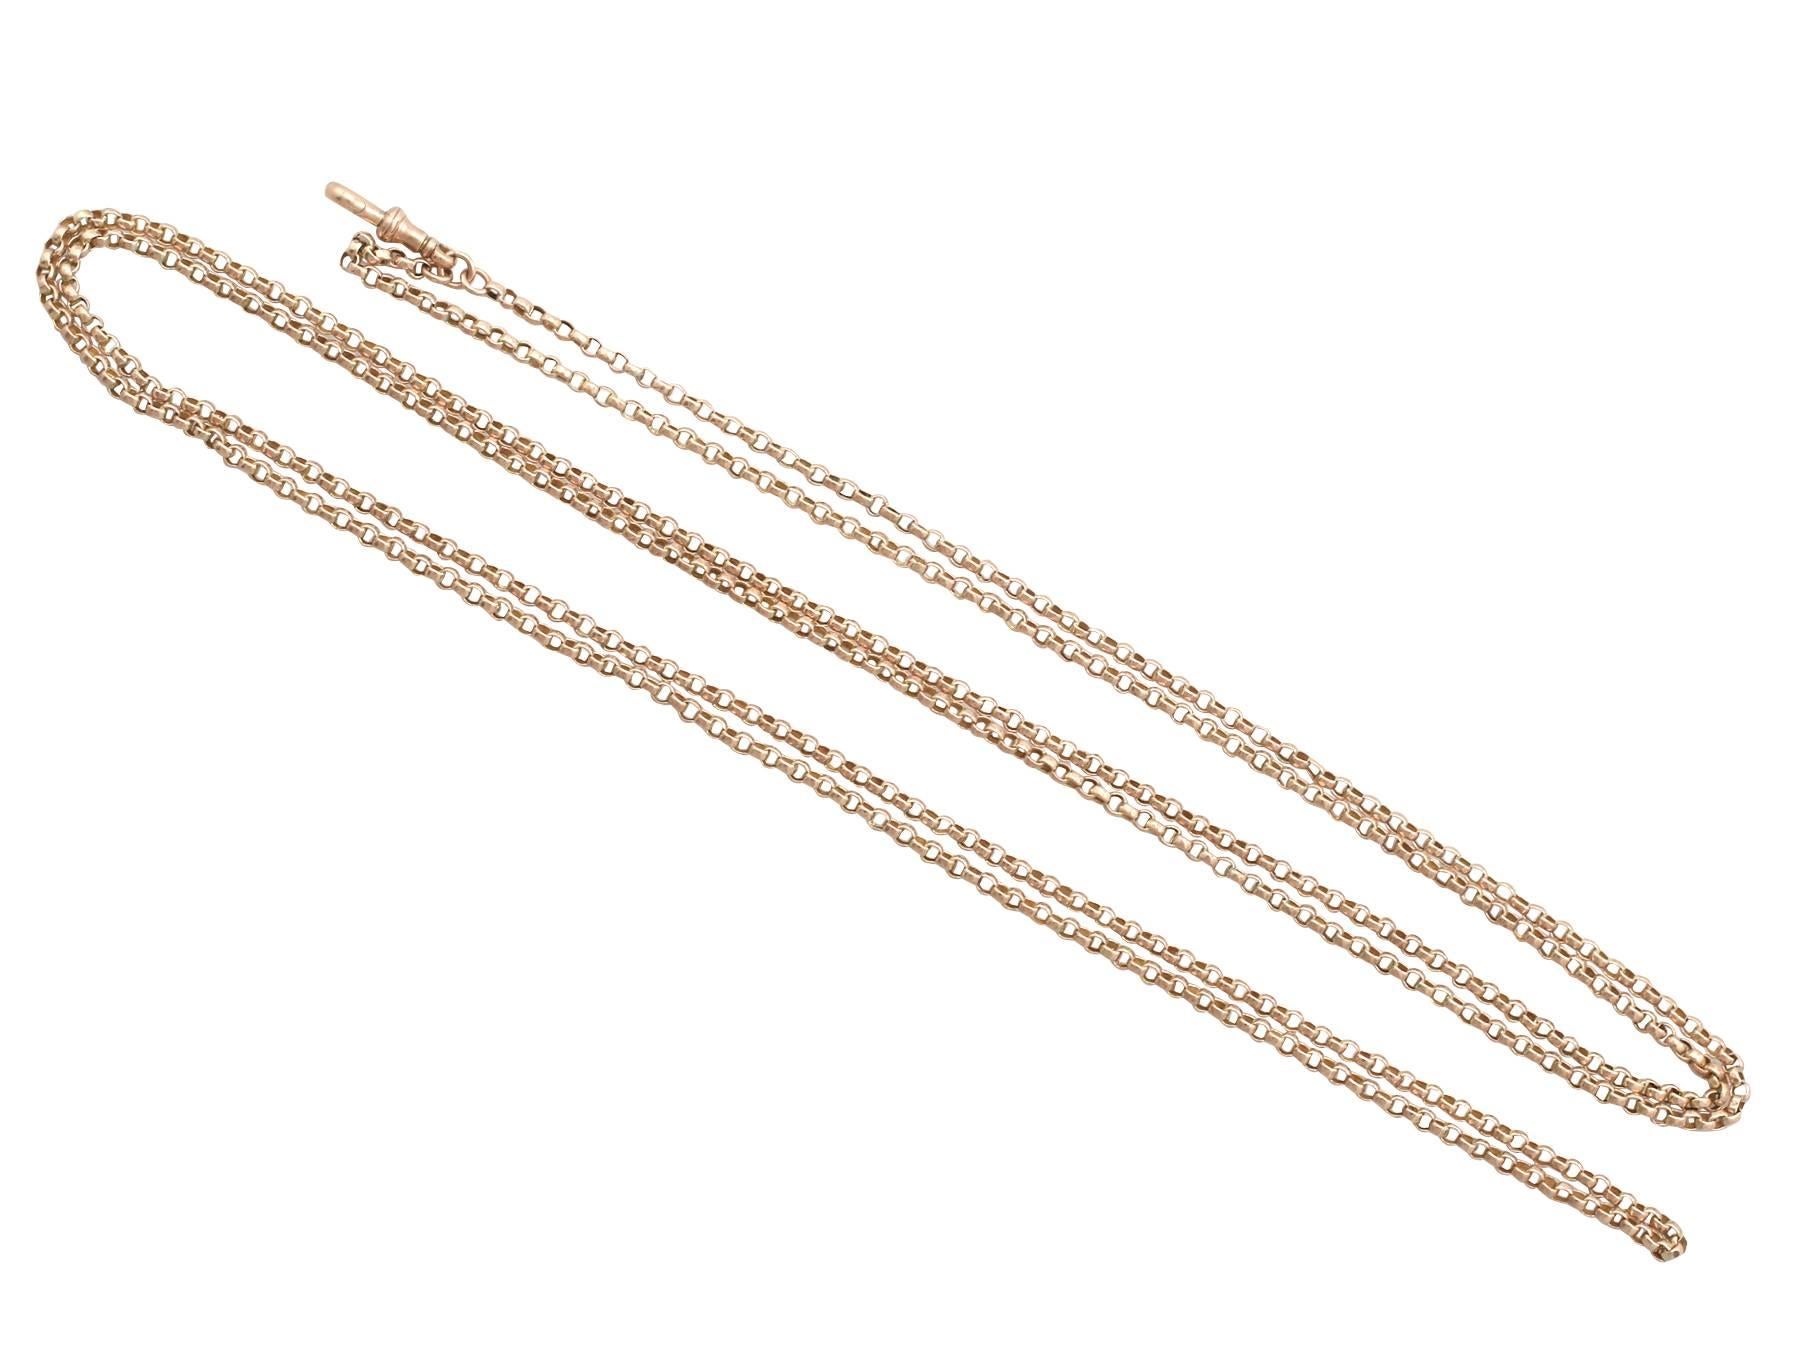 A fine and impressive antique Victorian 9 karat yellow gold longuard chain; part of our antique jewelry and estate jewelry collections

This fine and impressive antique longuard chain has been crafted in 9k yellow gold.

The links that make up this